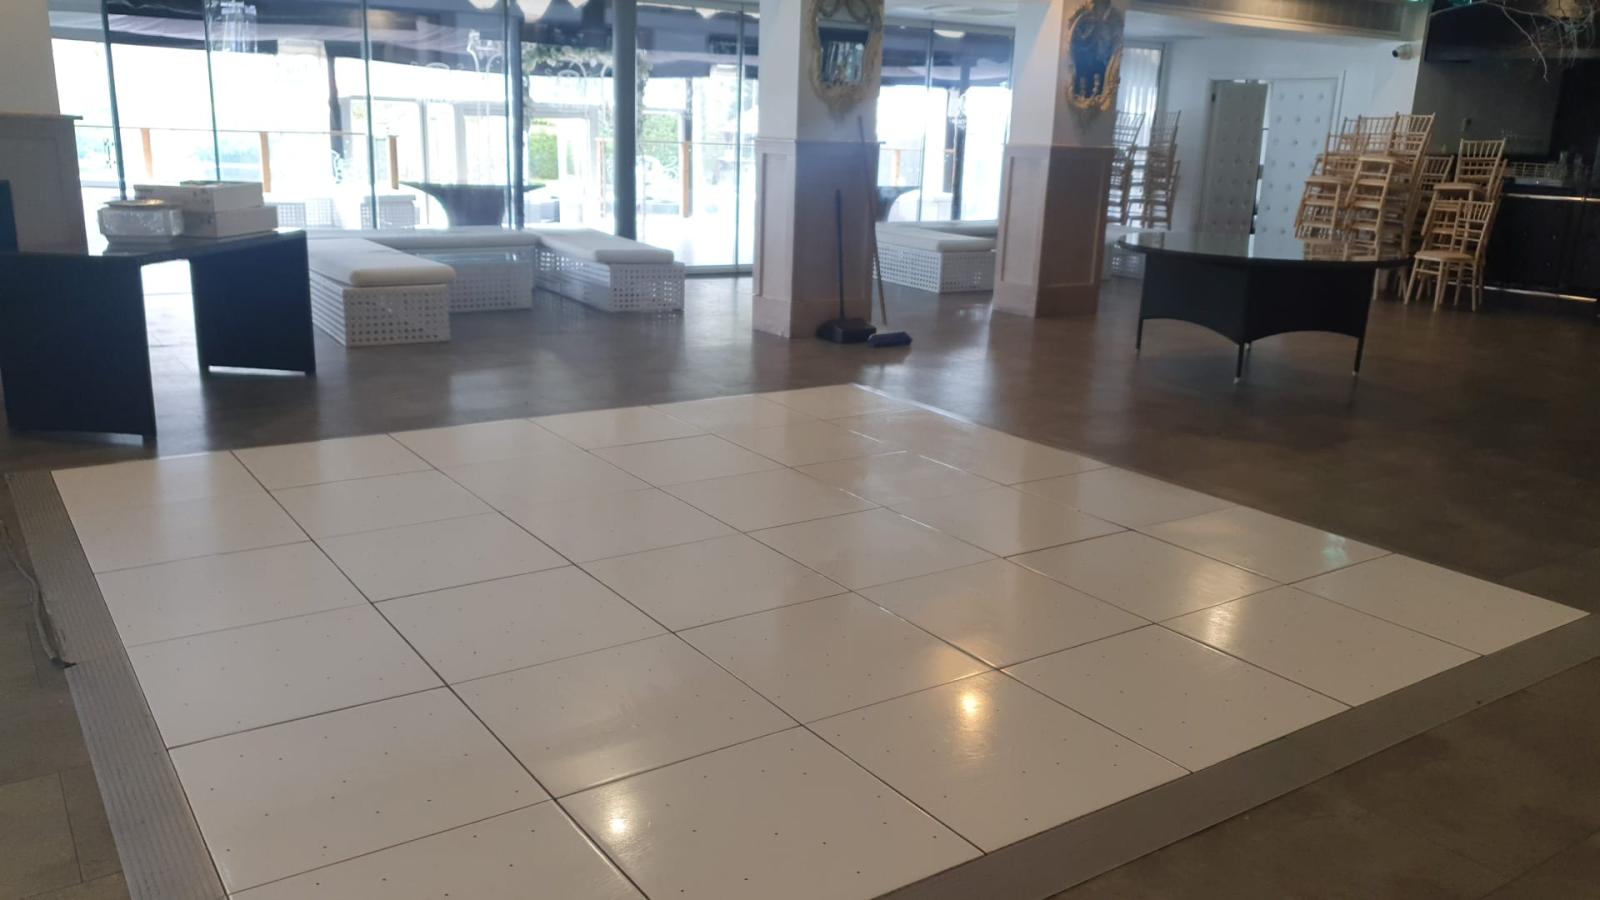 Commercial Cleaning in London